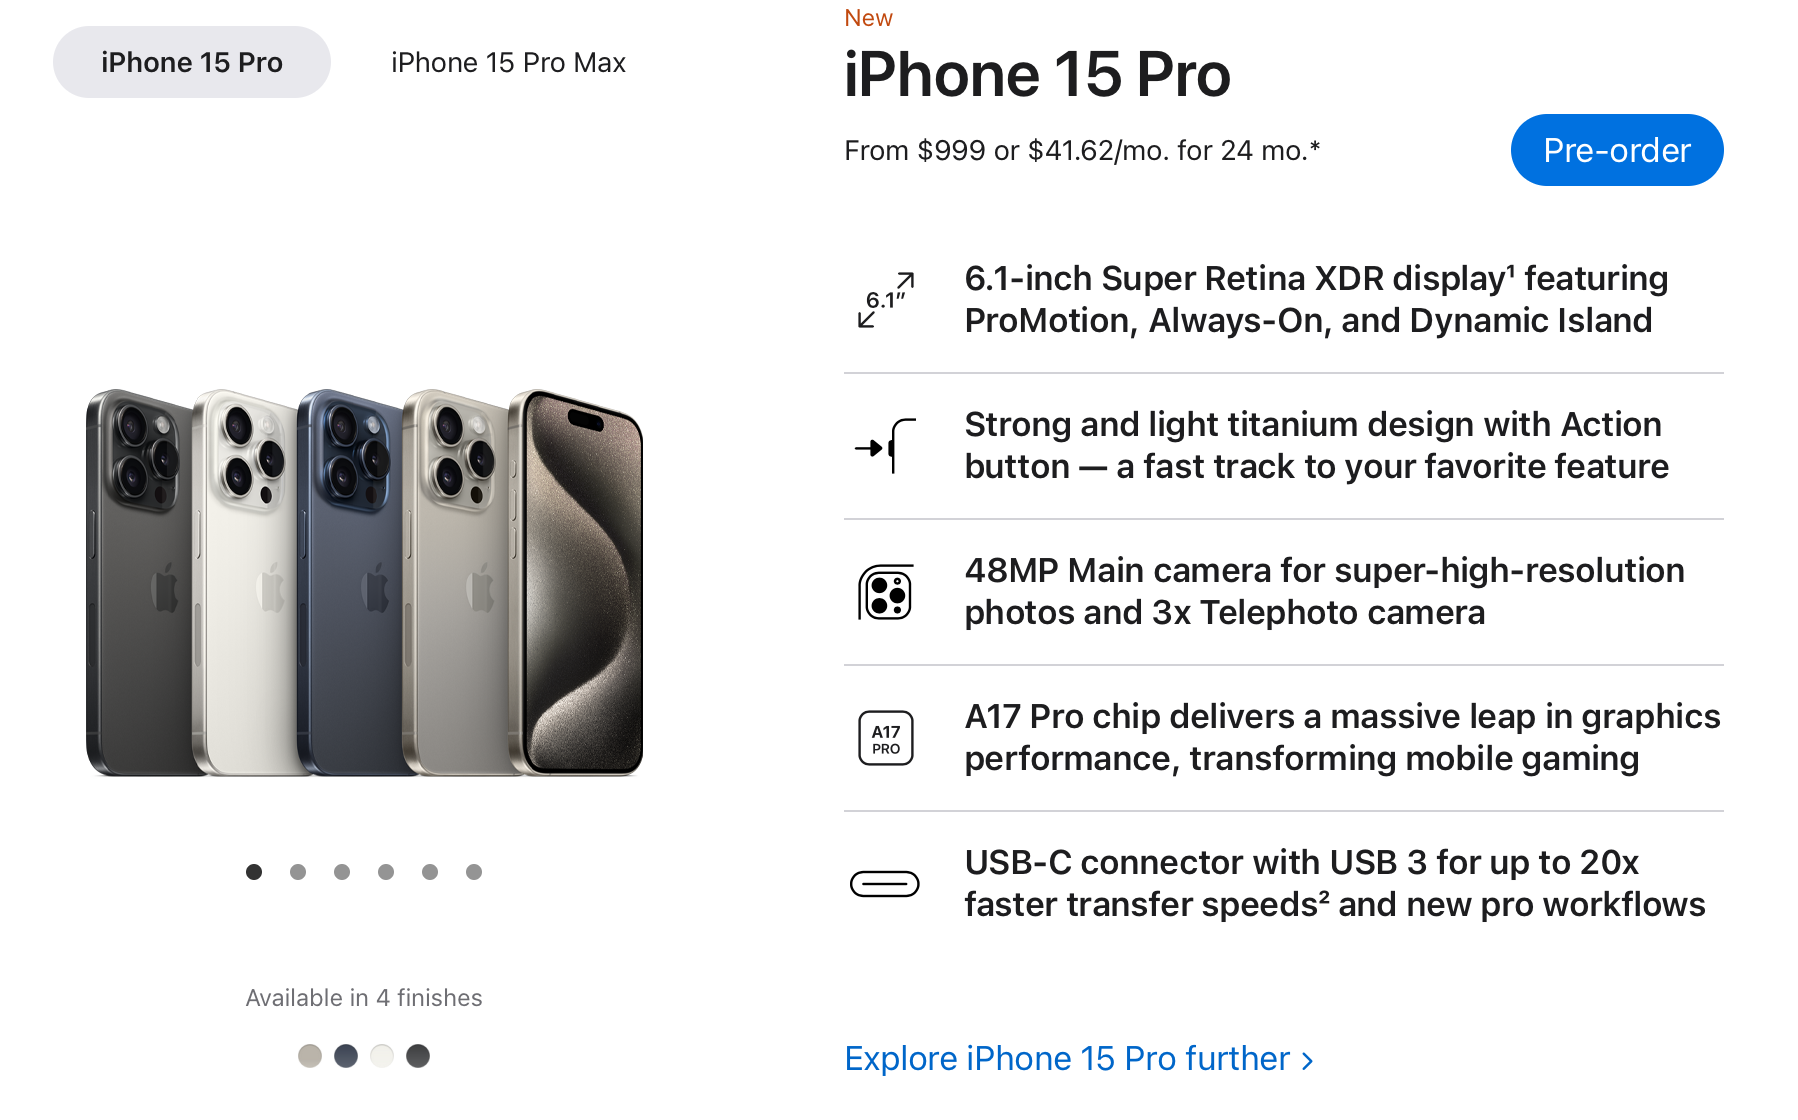 Technical requirements of iPhone 15 Pro